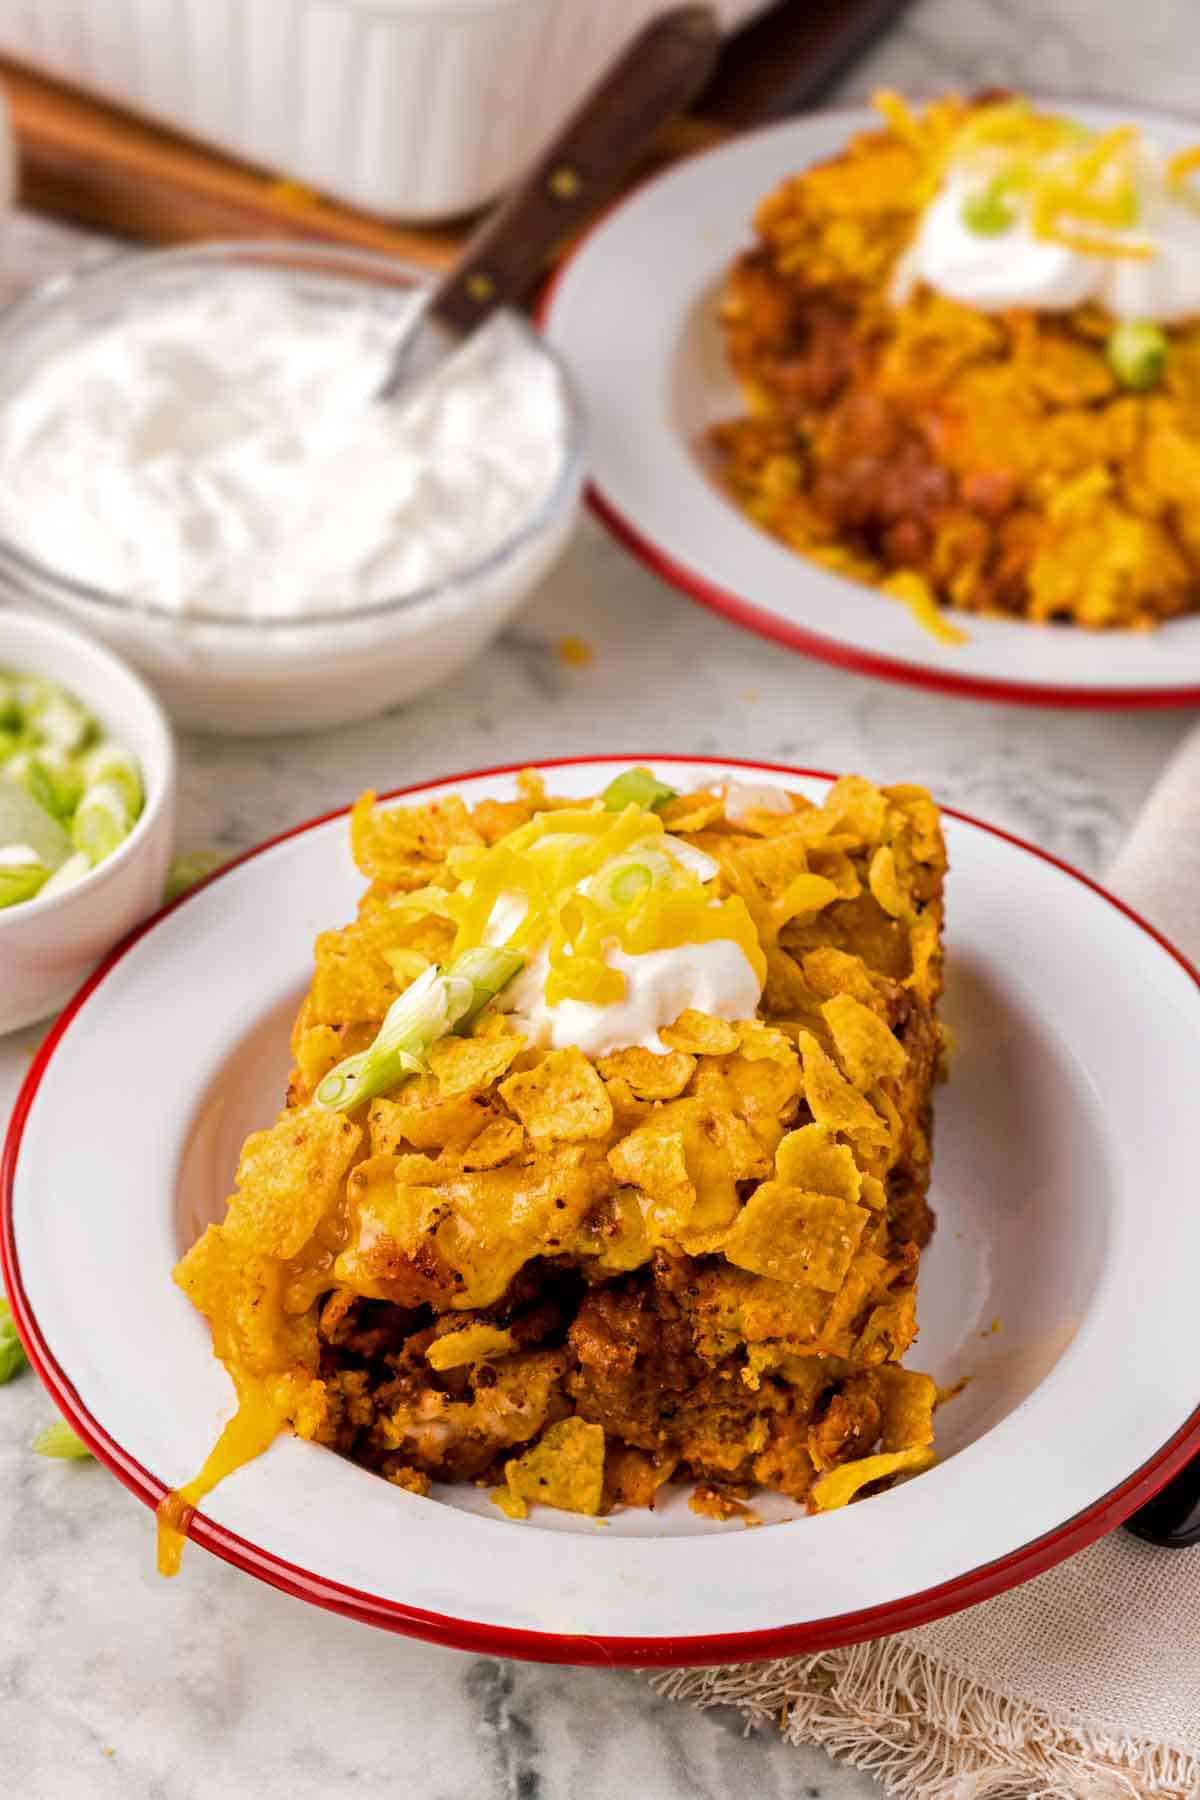 Crunchy Chili Bake with toppings